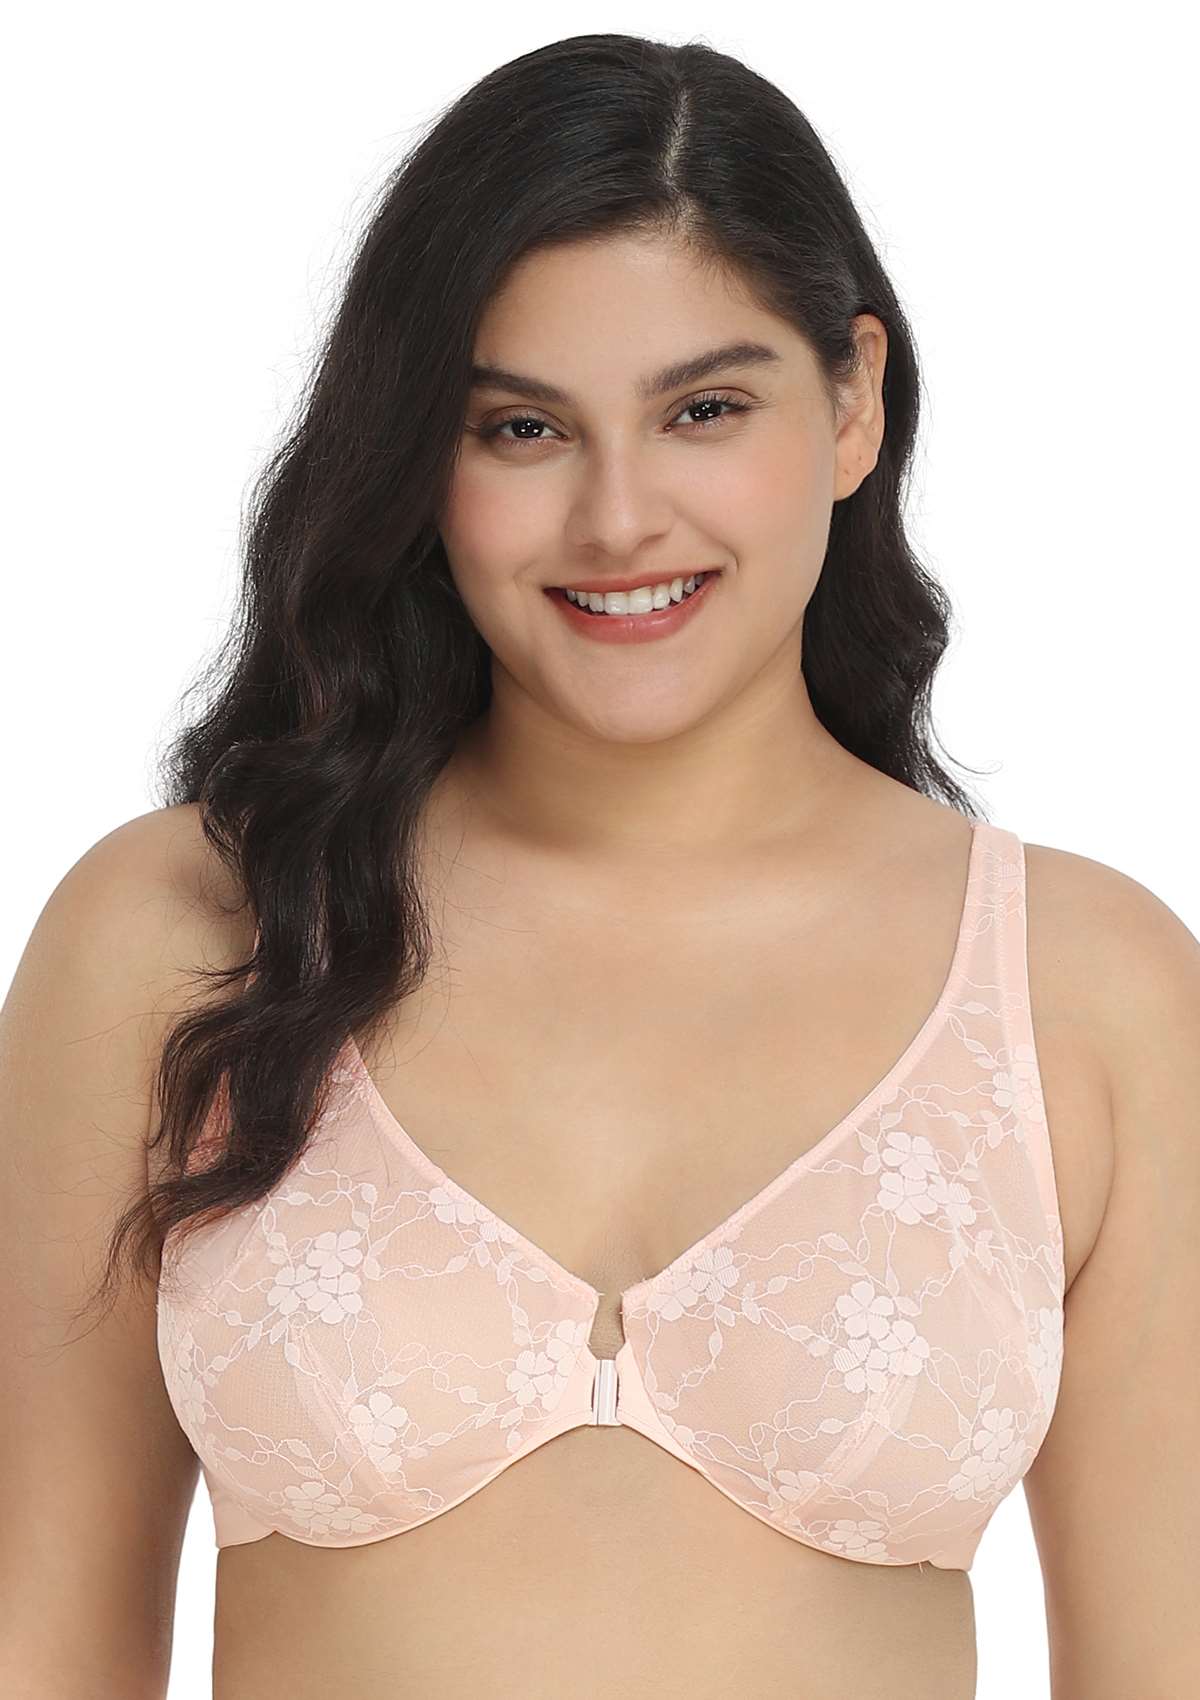 HSIA Spring Romance Front-Close Floral Lace Unlined Full Coverage Bra - White / 36 / G